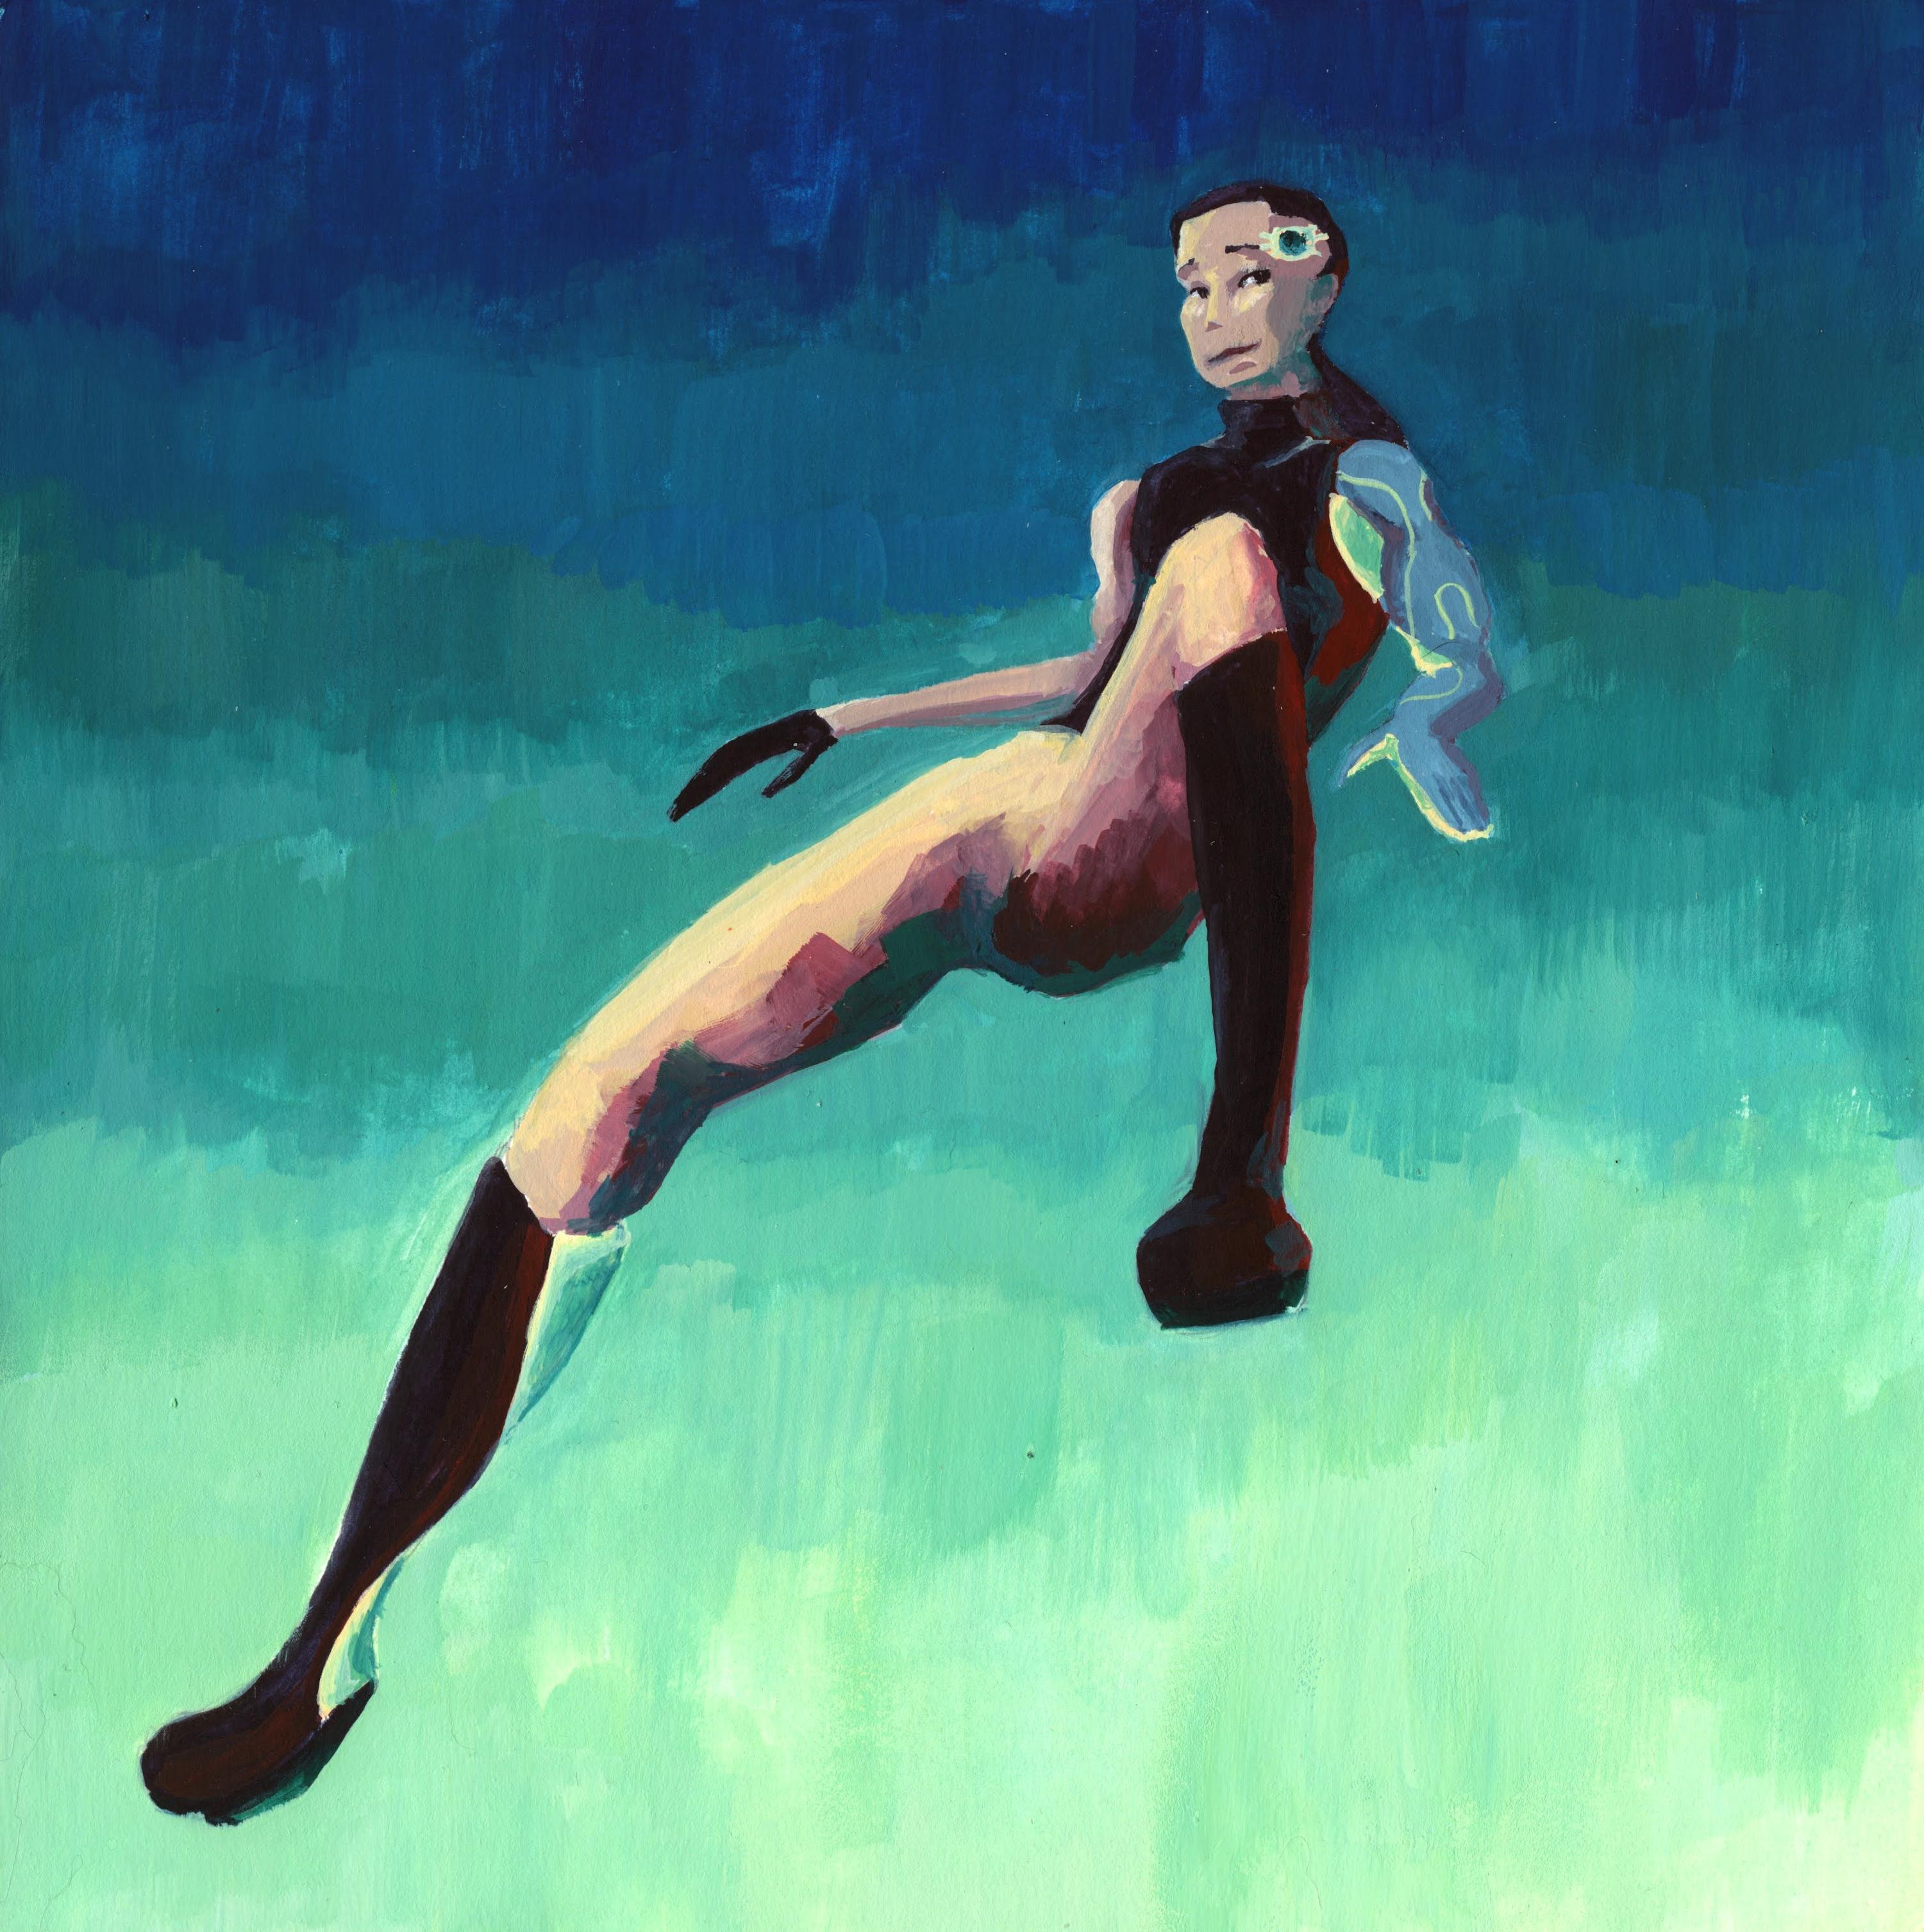 Maya with a bit of a cocky pose, looking at the viewer. Shadows in teal
and red, a blue-green gradient background.